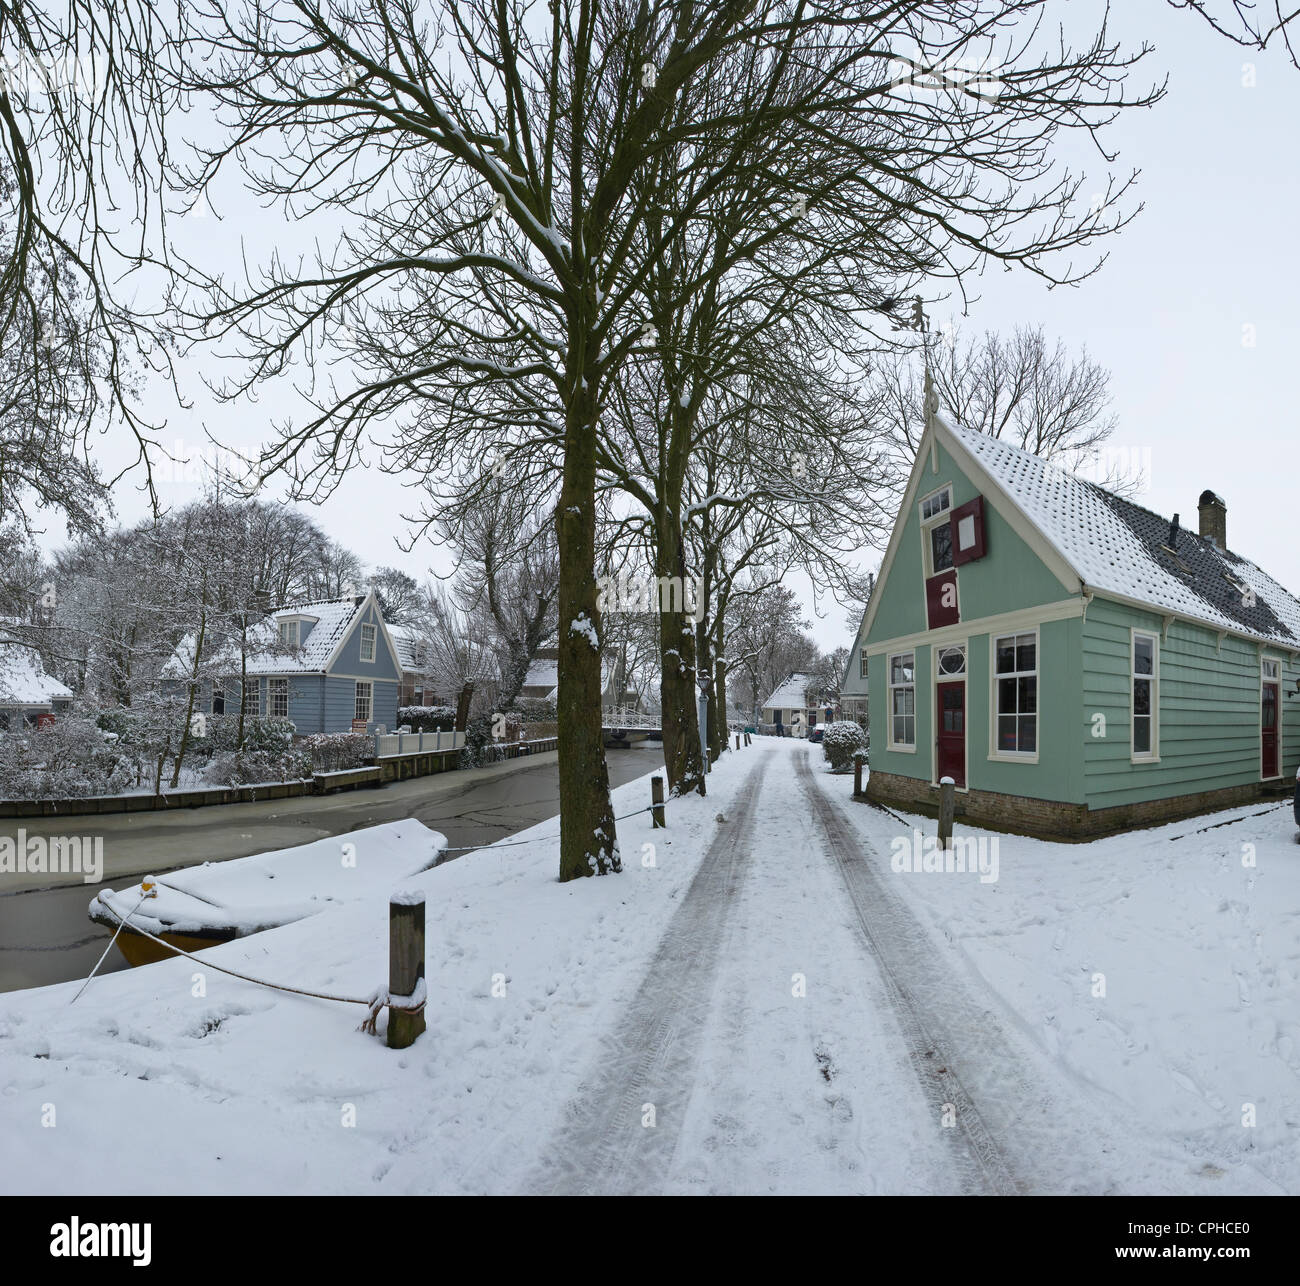 Netherlands, Holland, Europe, Broek in Waterland, Farm, Forest, Wood, Trees, Winter, Snow, Ice, Wooden house Stock Photo